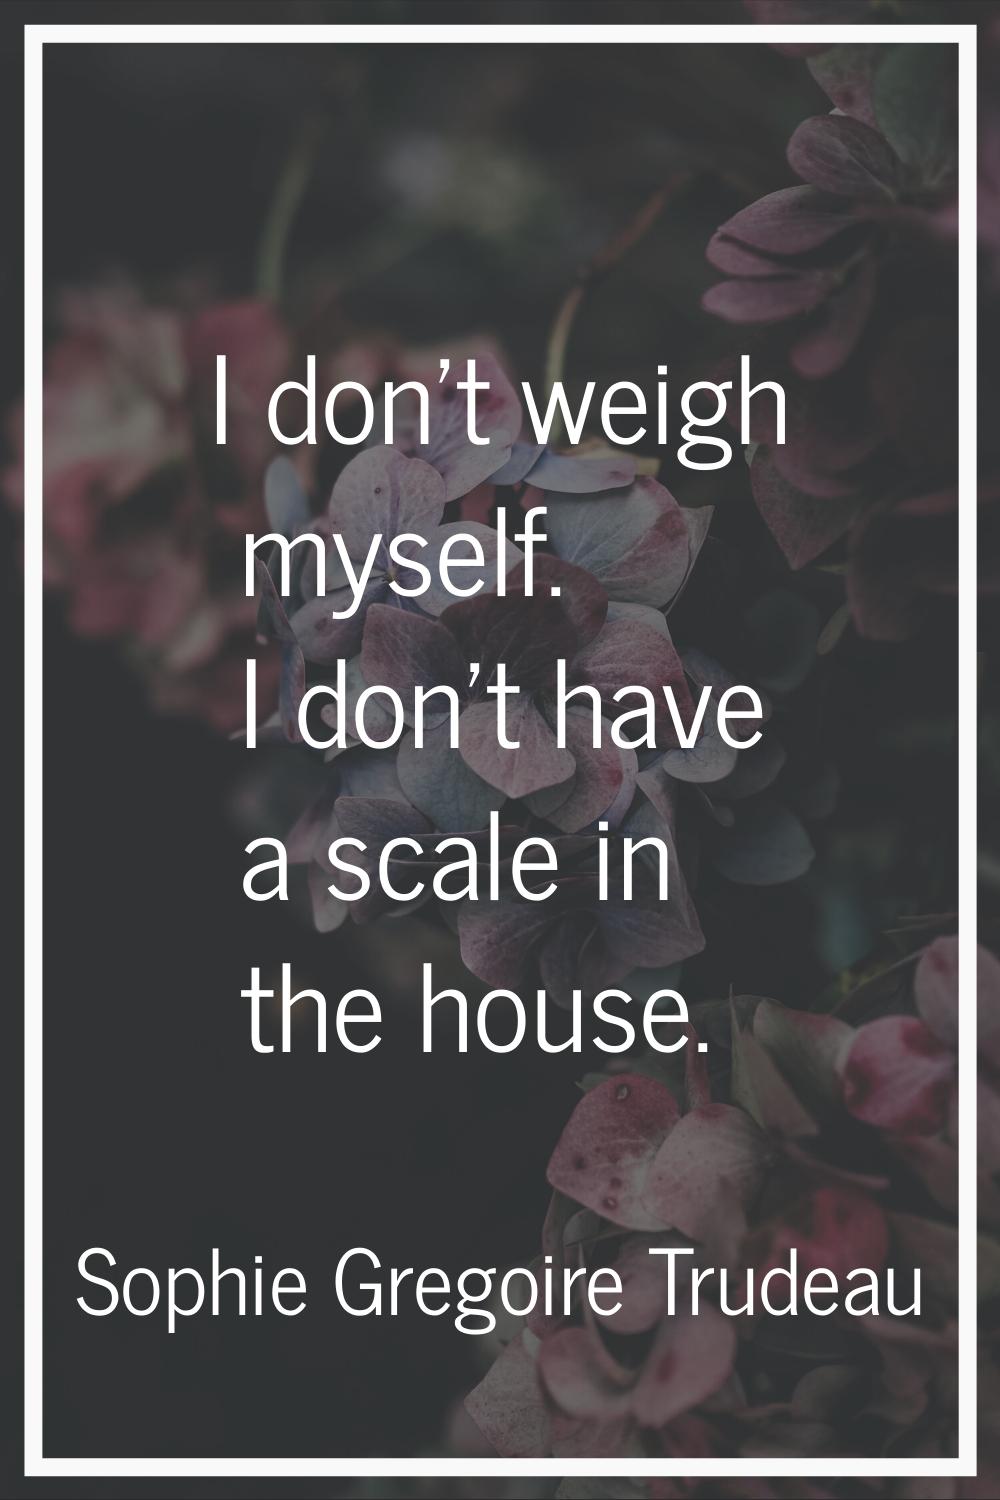 I don't weigh myself. I don't have a scale in the house.